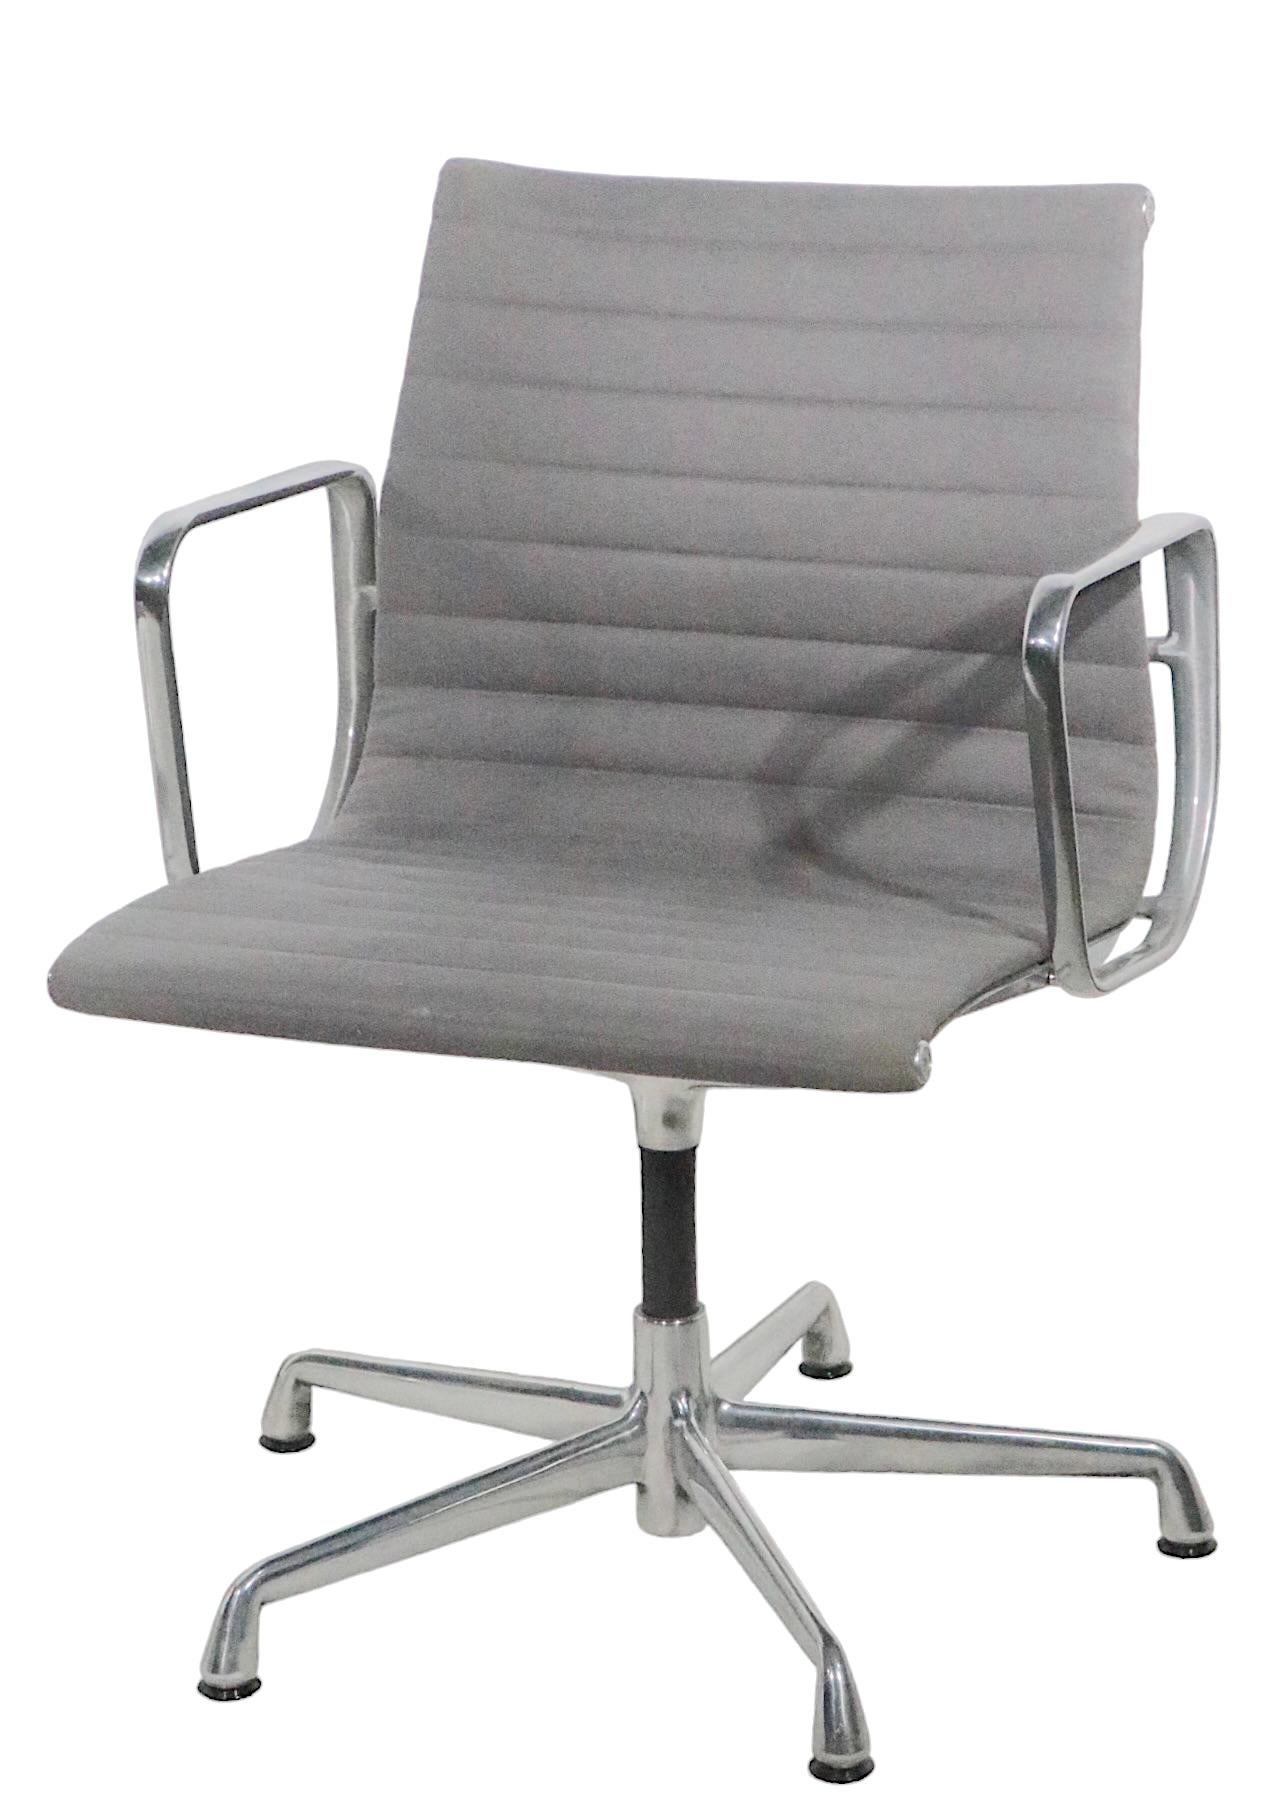 Eames Management Chairs in Grey Fabric Upholstery c. 1980 - 1990s 4 Available  For Sale 7